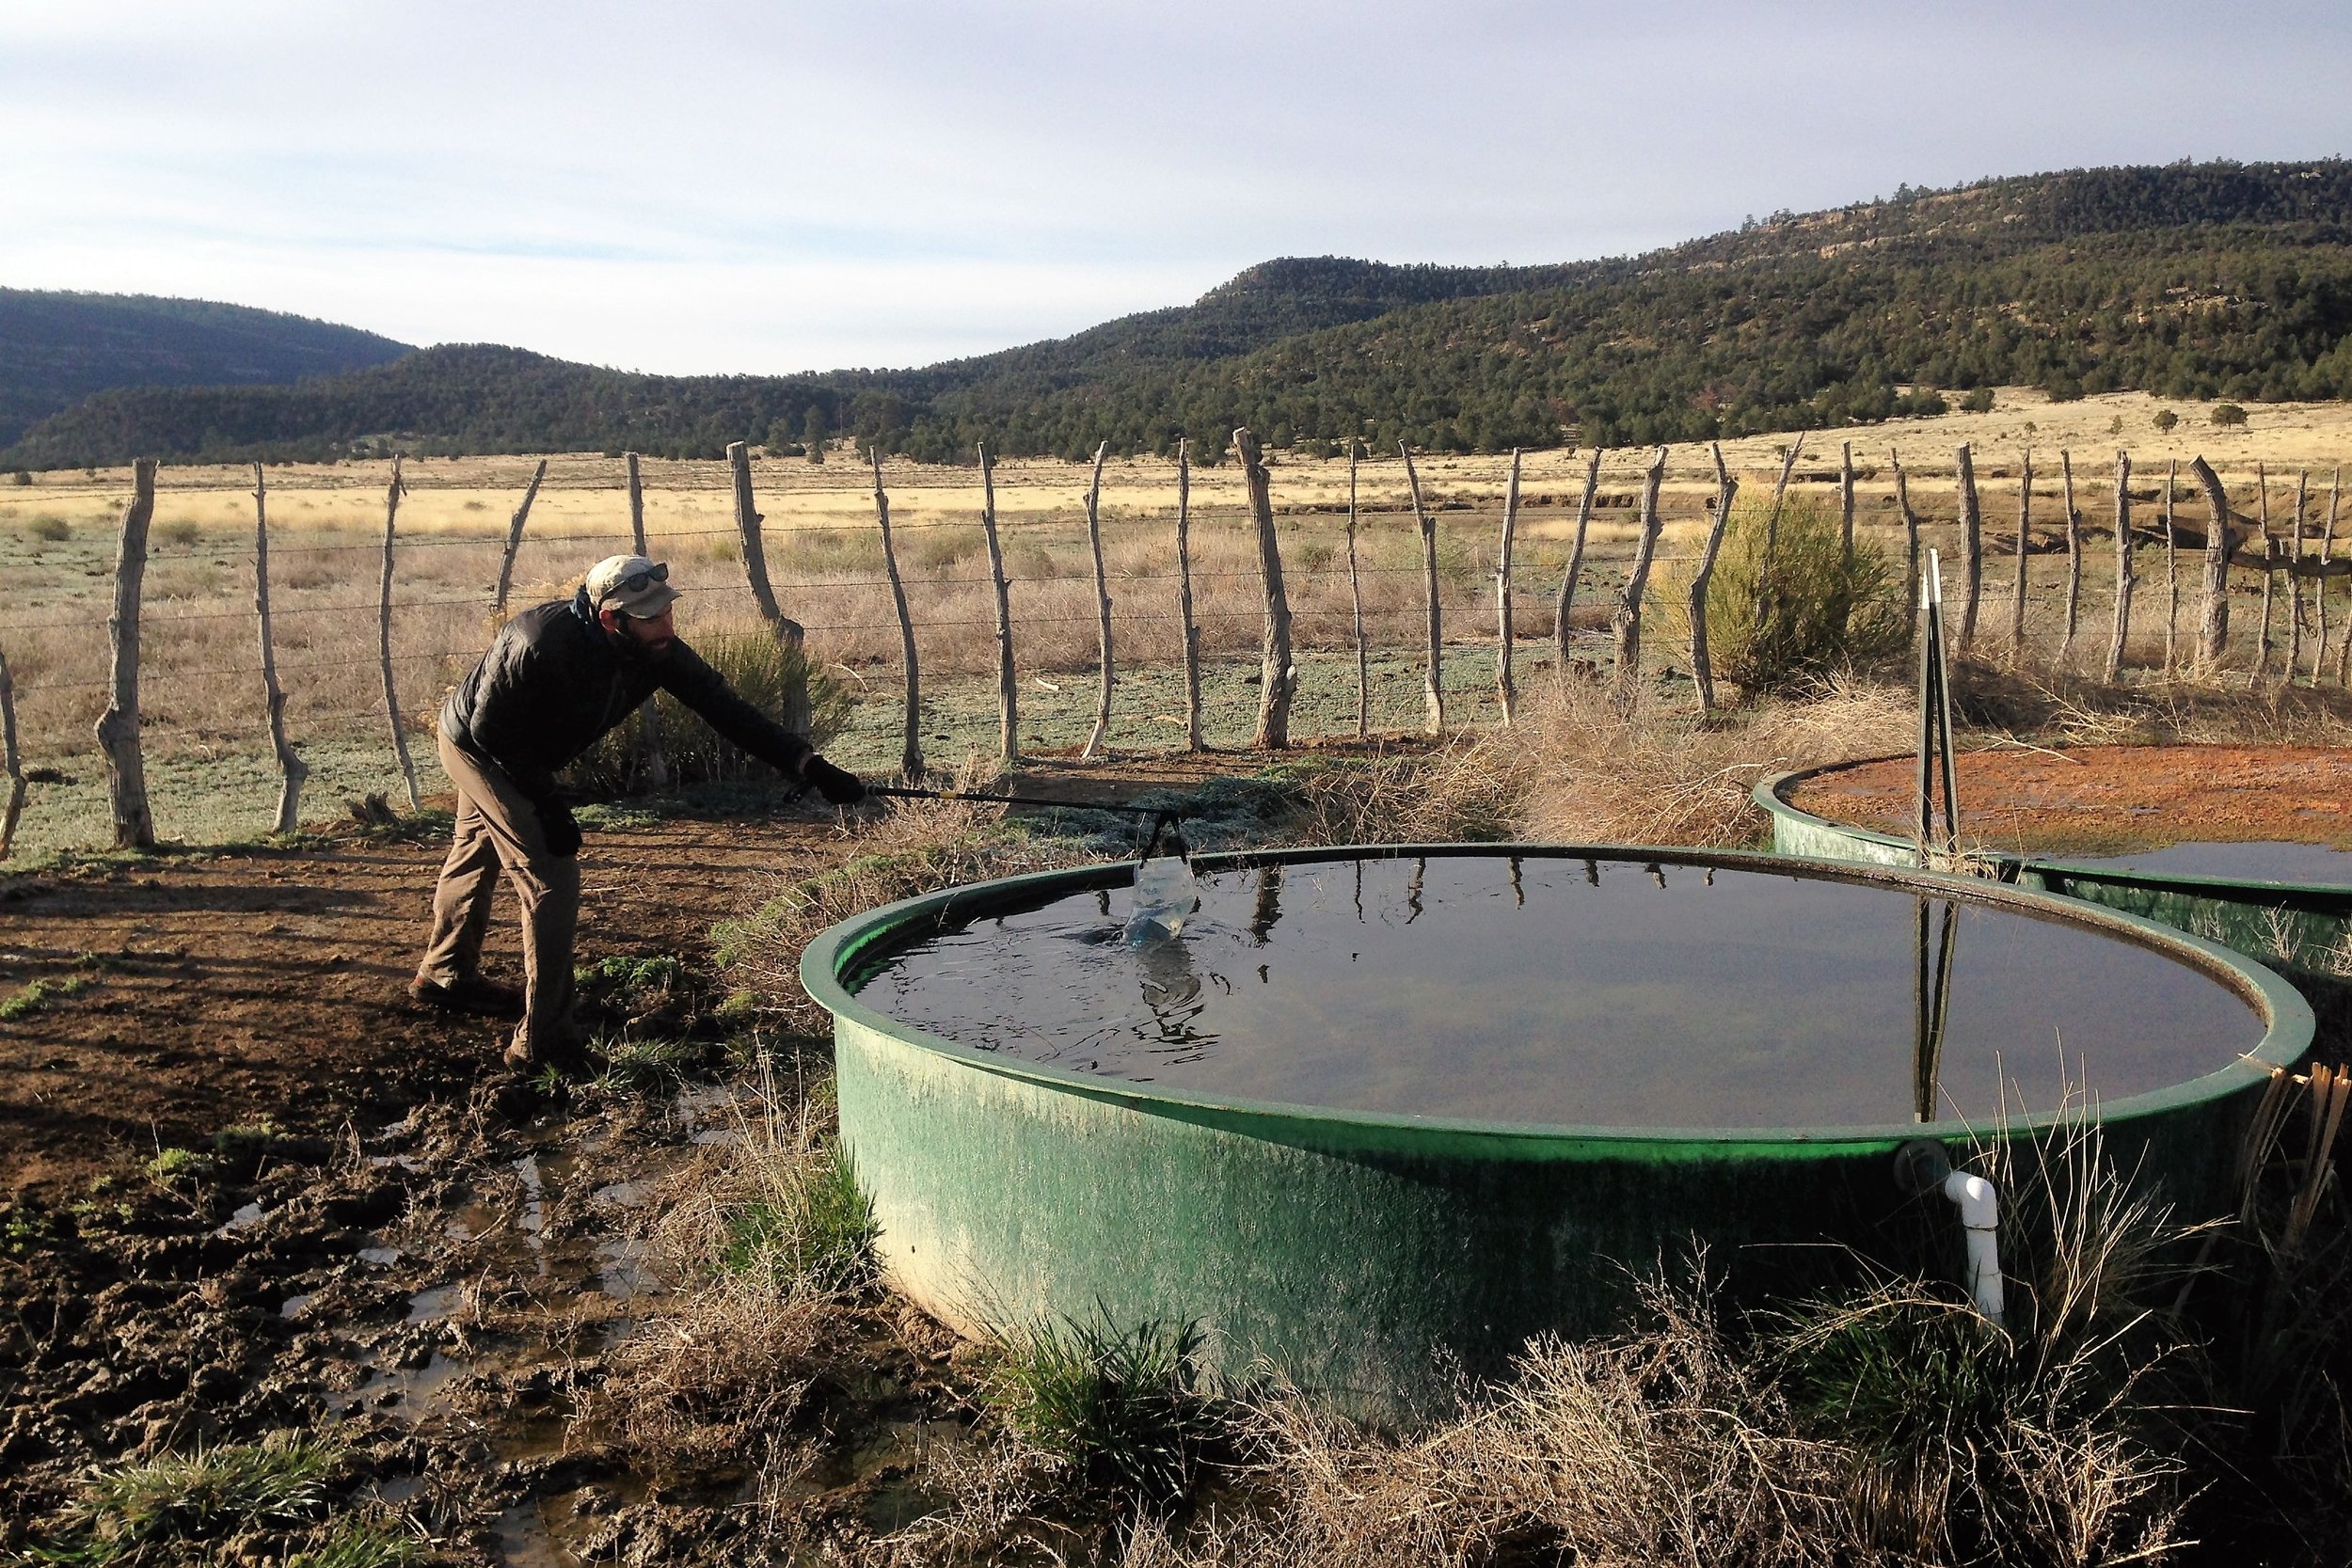 A hiker gathering water from a livestock tank with mountains in the background